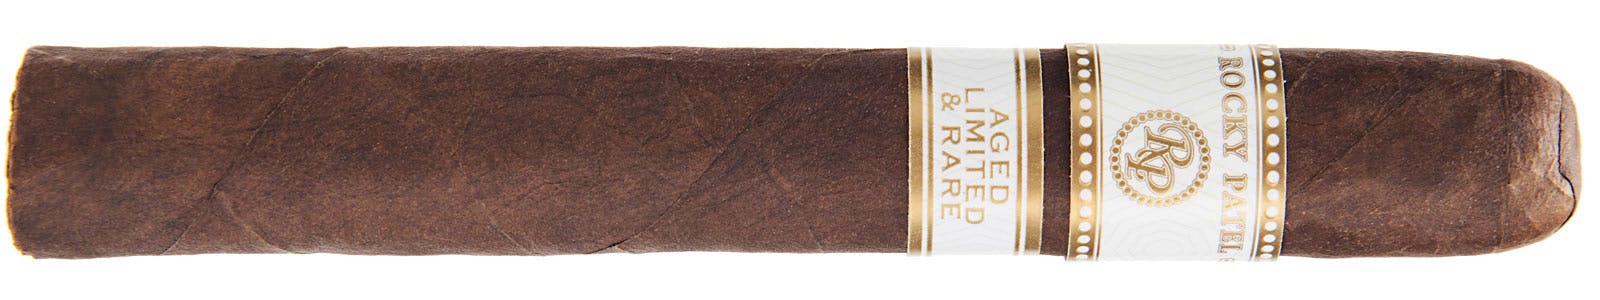 Rocky Patel ALR will be launching alongside Tavicusa and Liberation By Hamlet this week.